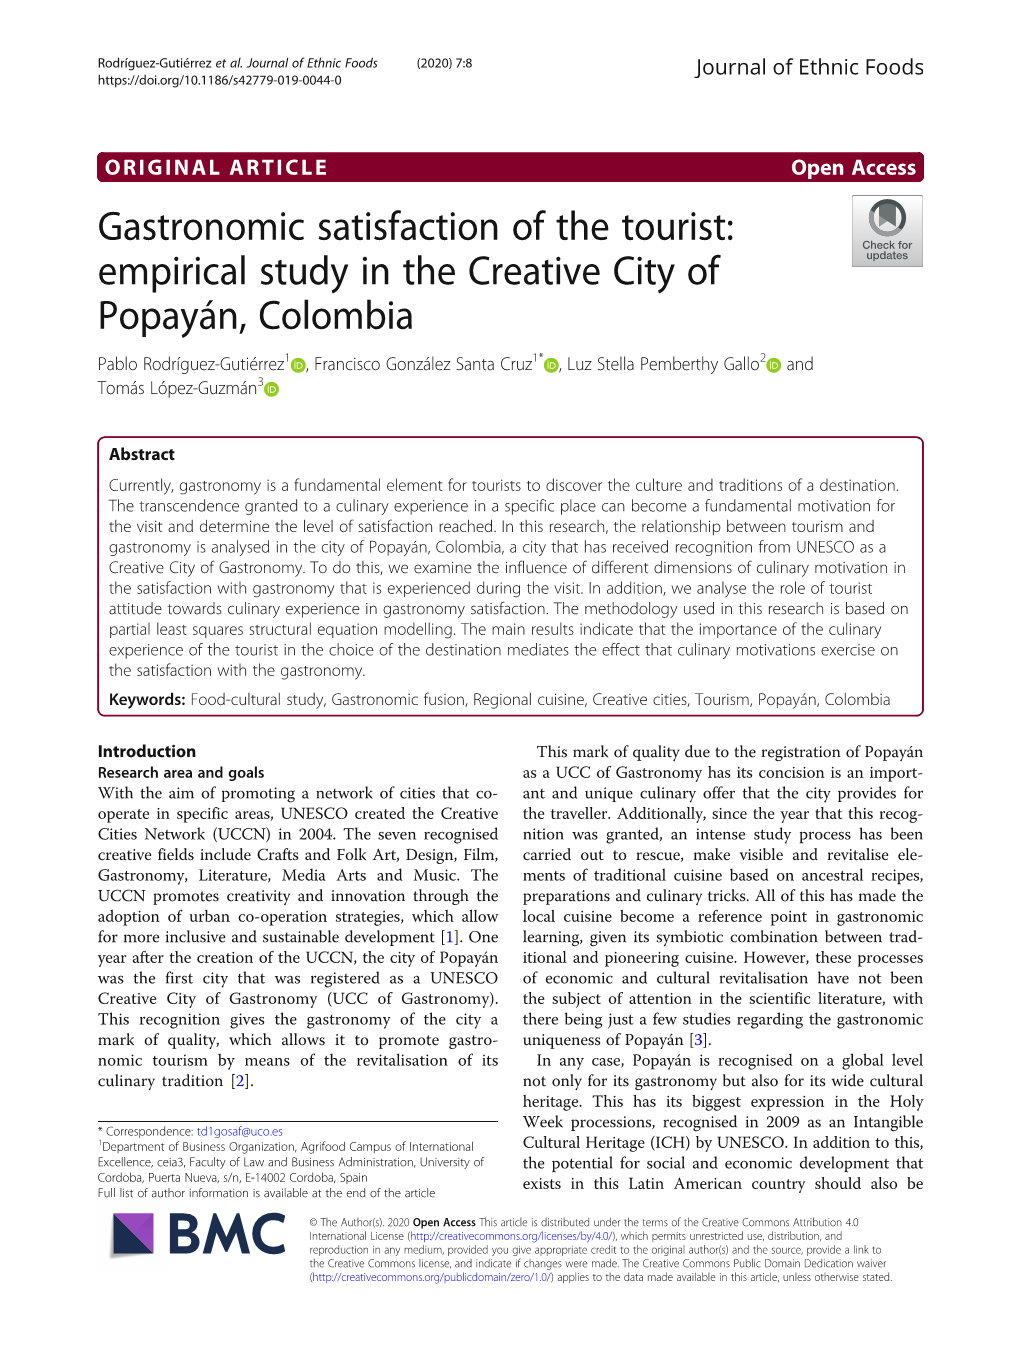 Gastronomic Satisfaction of the Tourist: Empirical Study in the Creative City